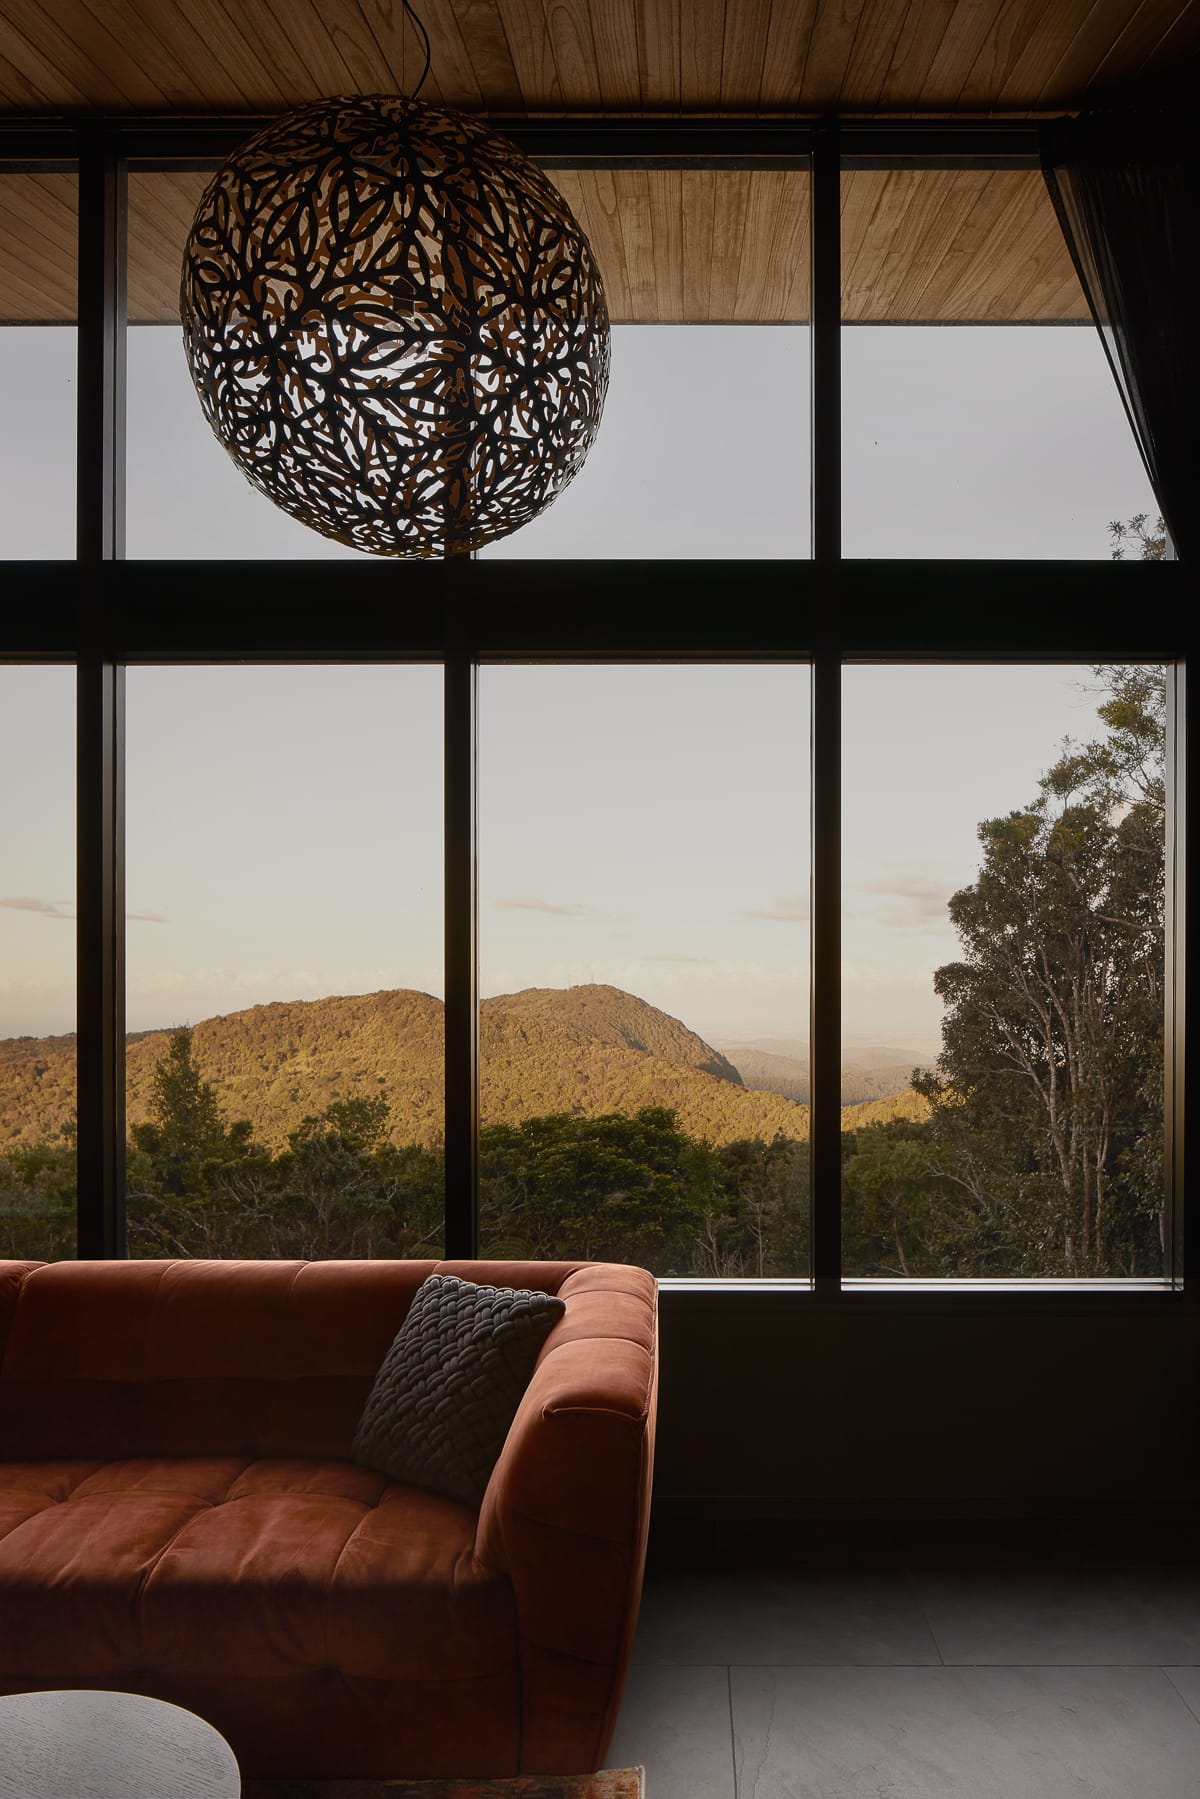 An interior shot of the living room showing an orange sofa in the foreground and the view of the mountain rainforest in the background